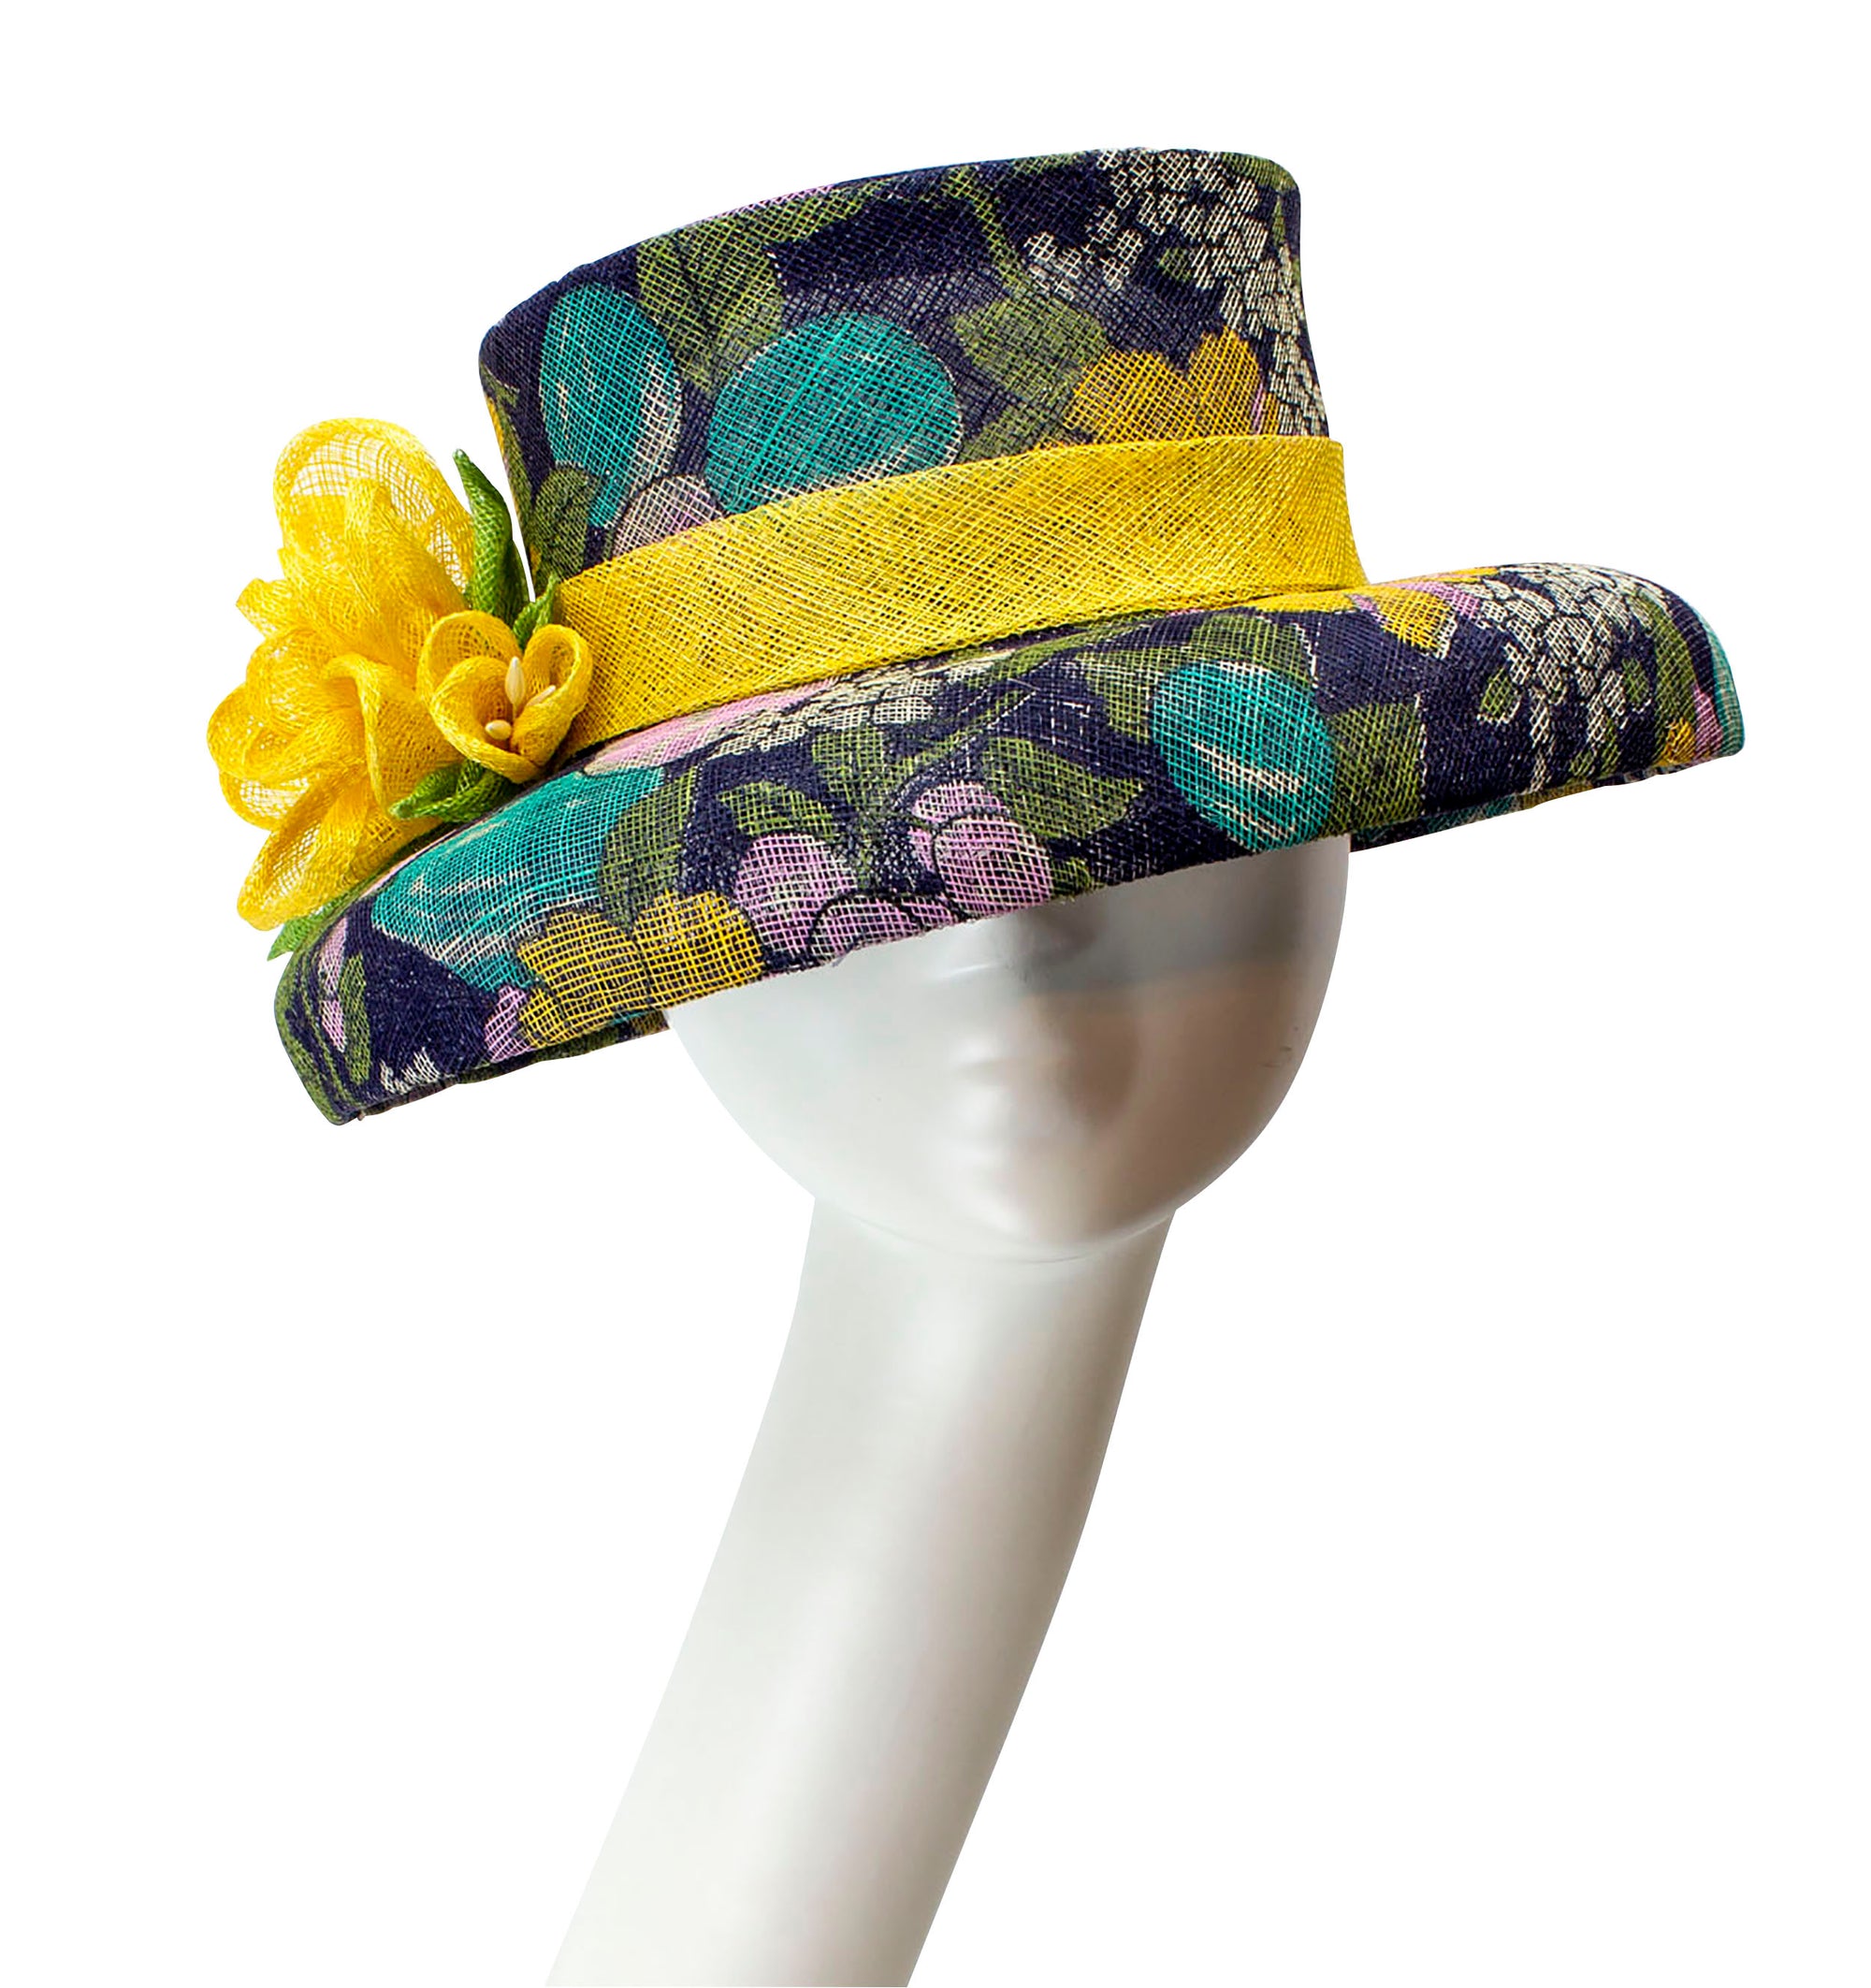 Audrey Floral Sinamay Hat